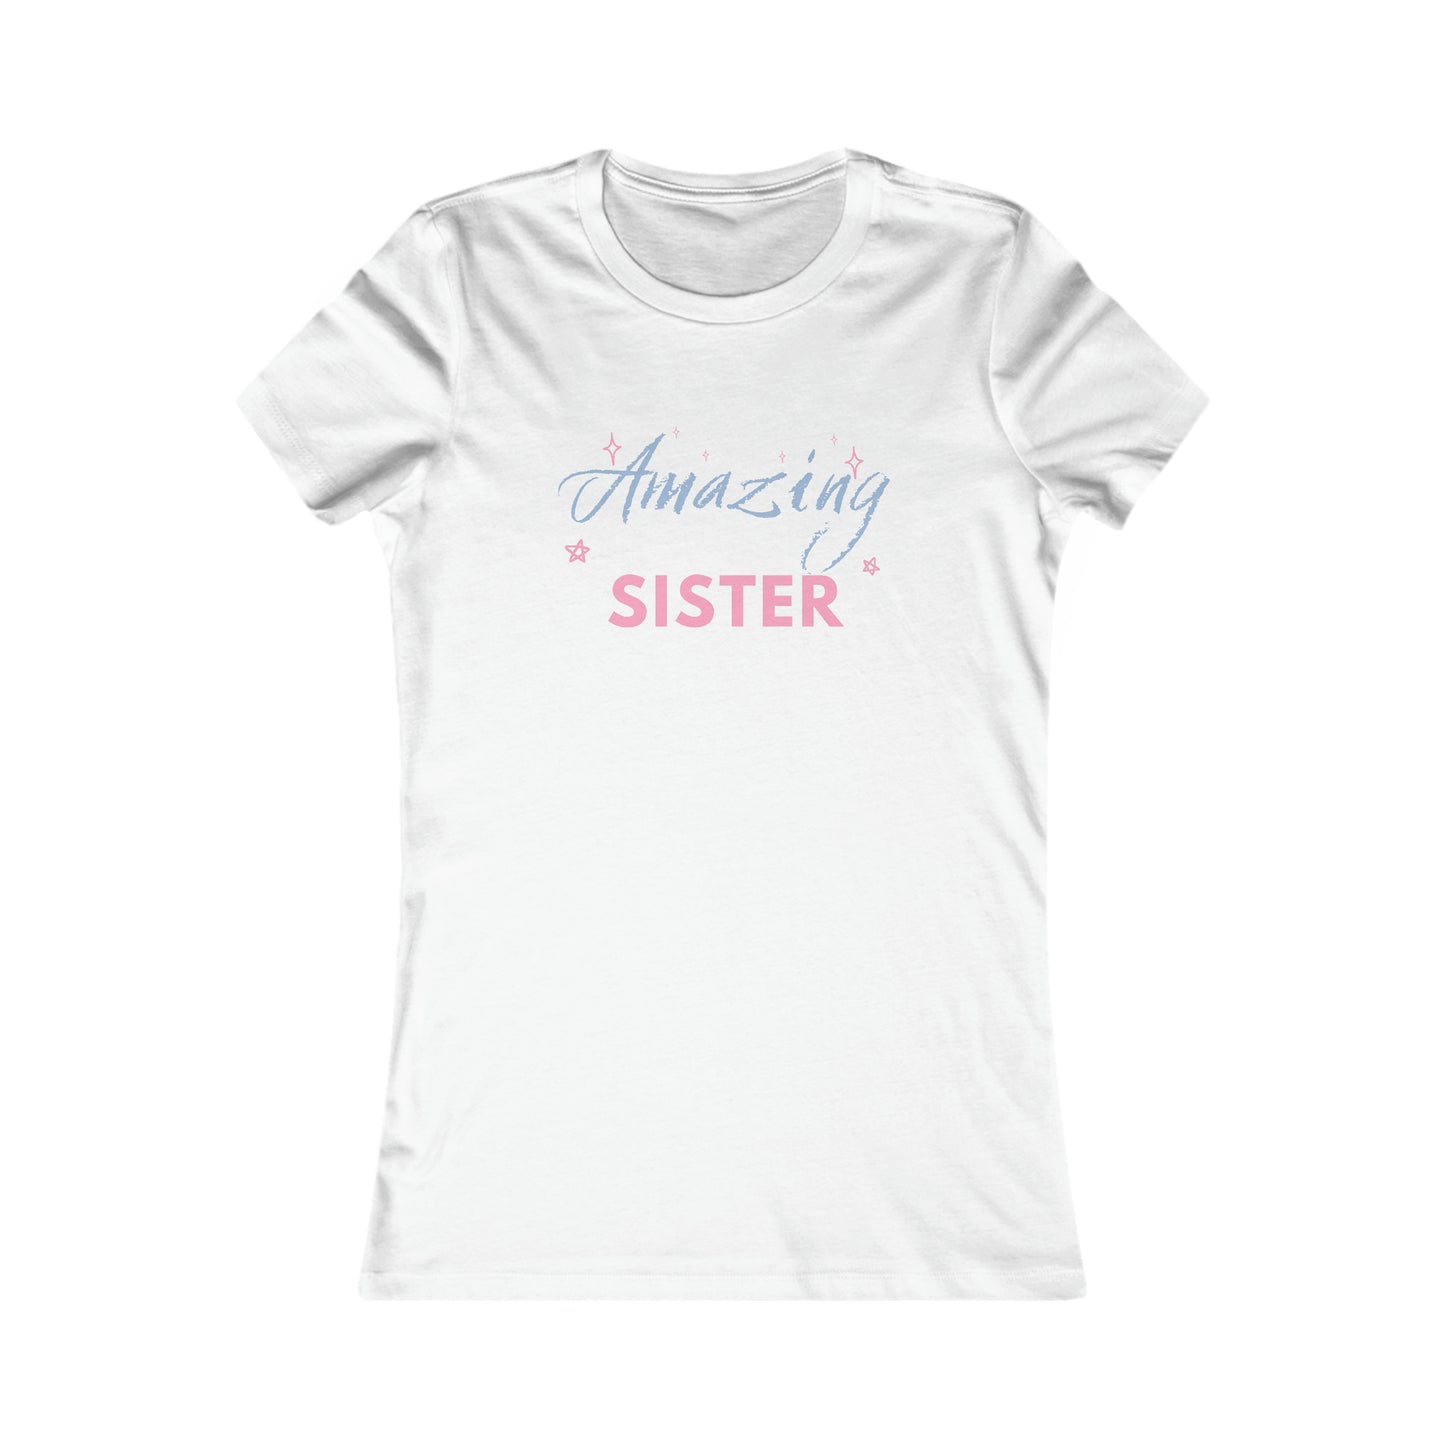 Amazing Sister Women's Favorite Tee | Gift for Sisters | Funny Sister Shirt